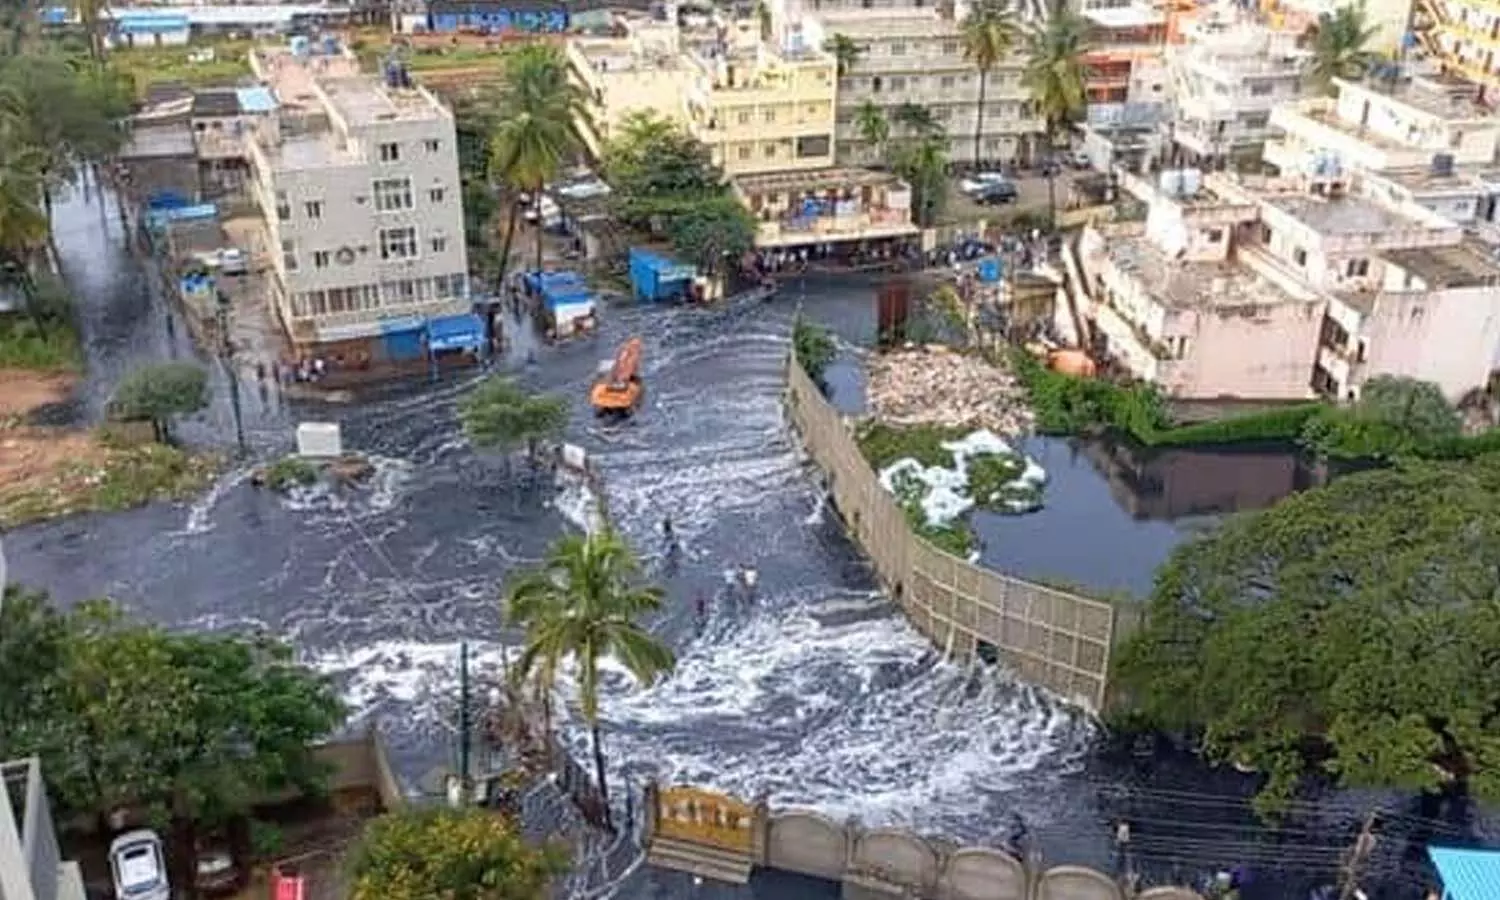 Floods in Bangalore are the result of playing with nature and urbanization